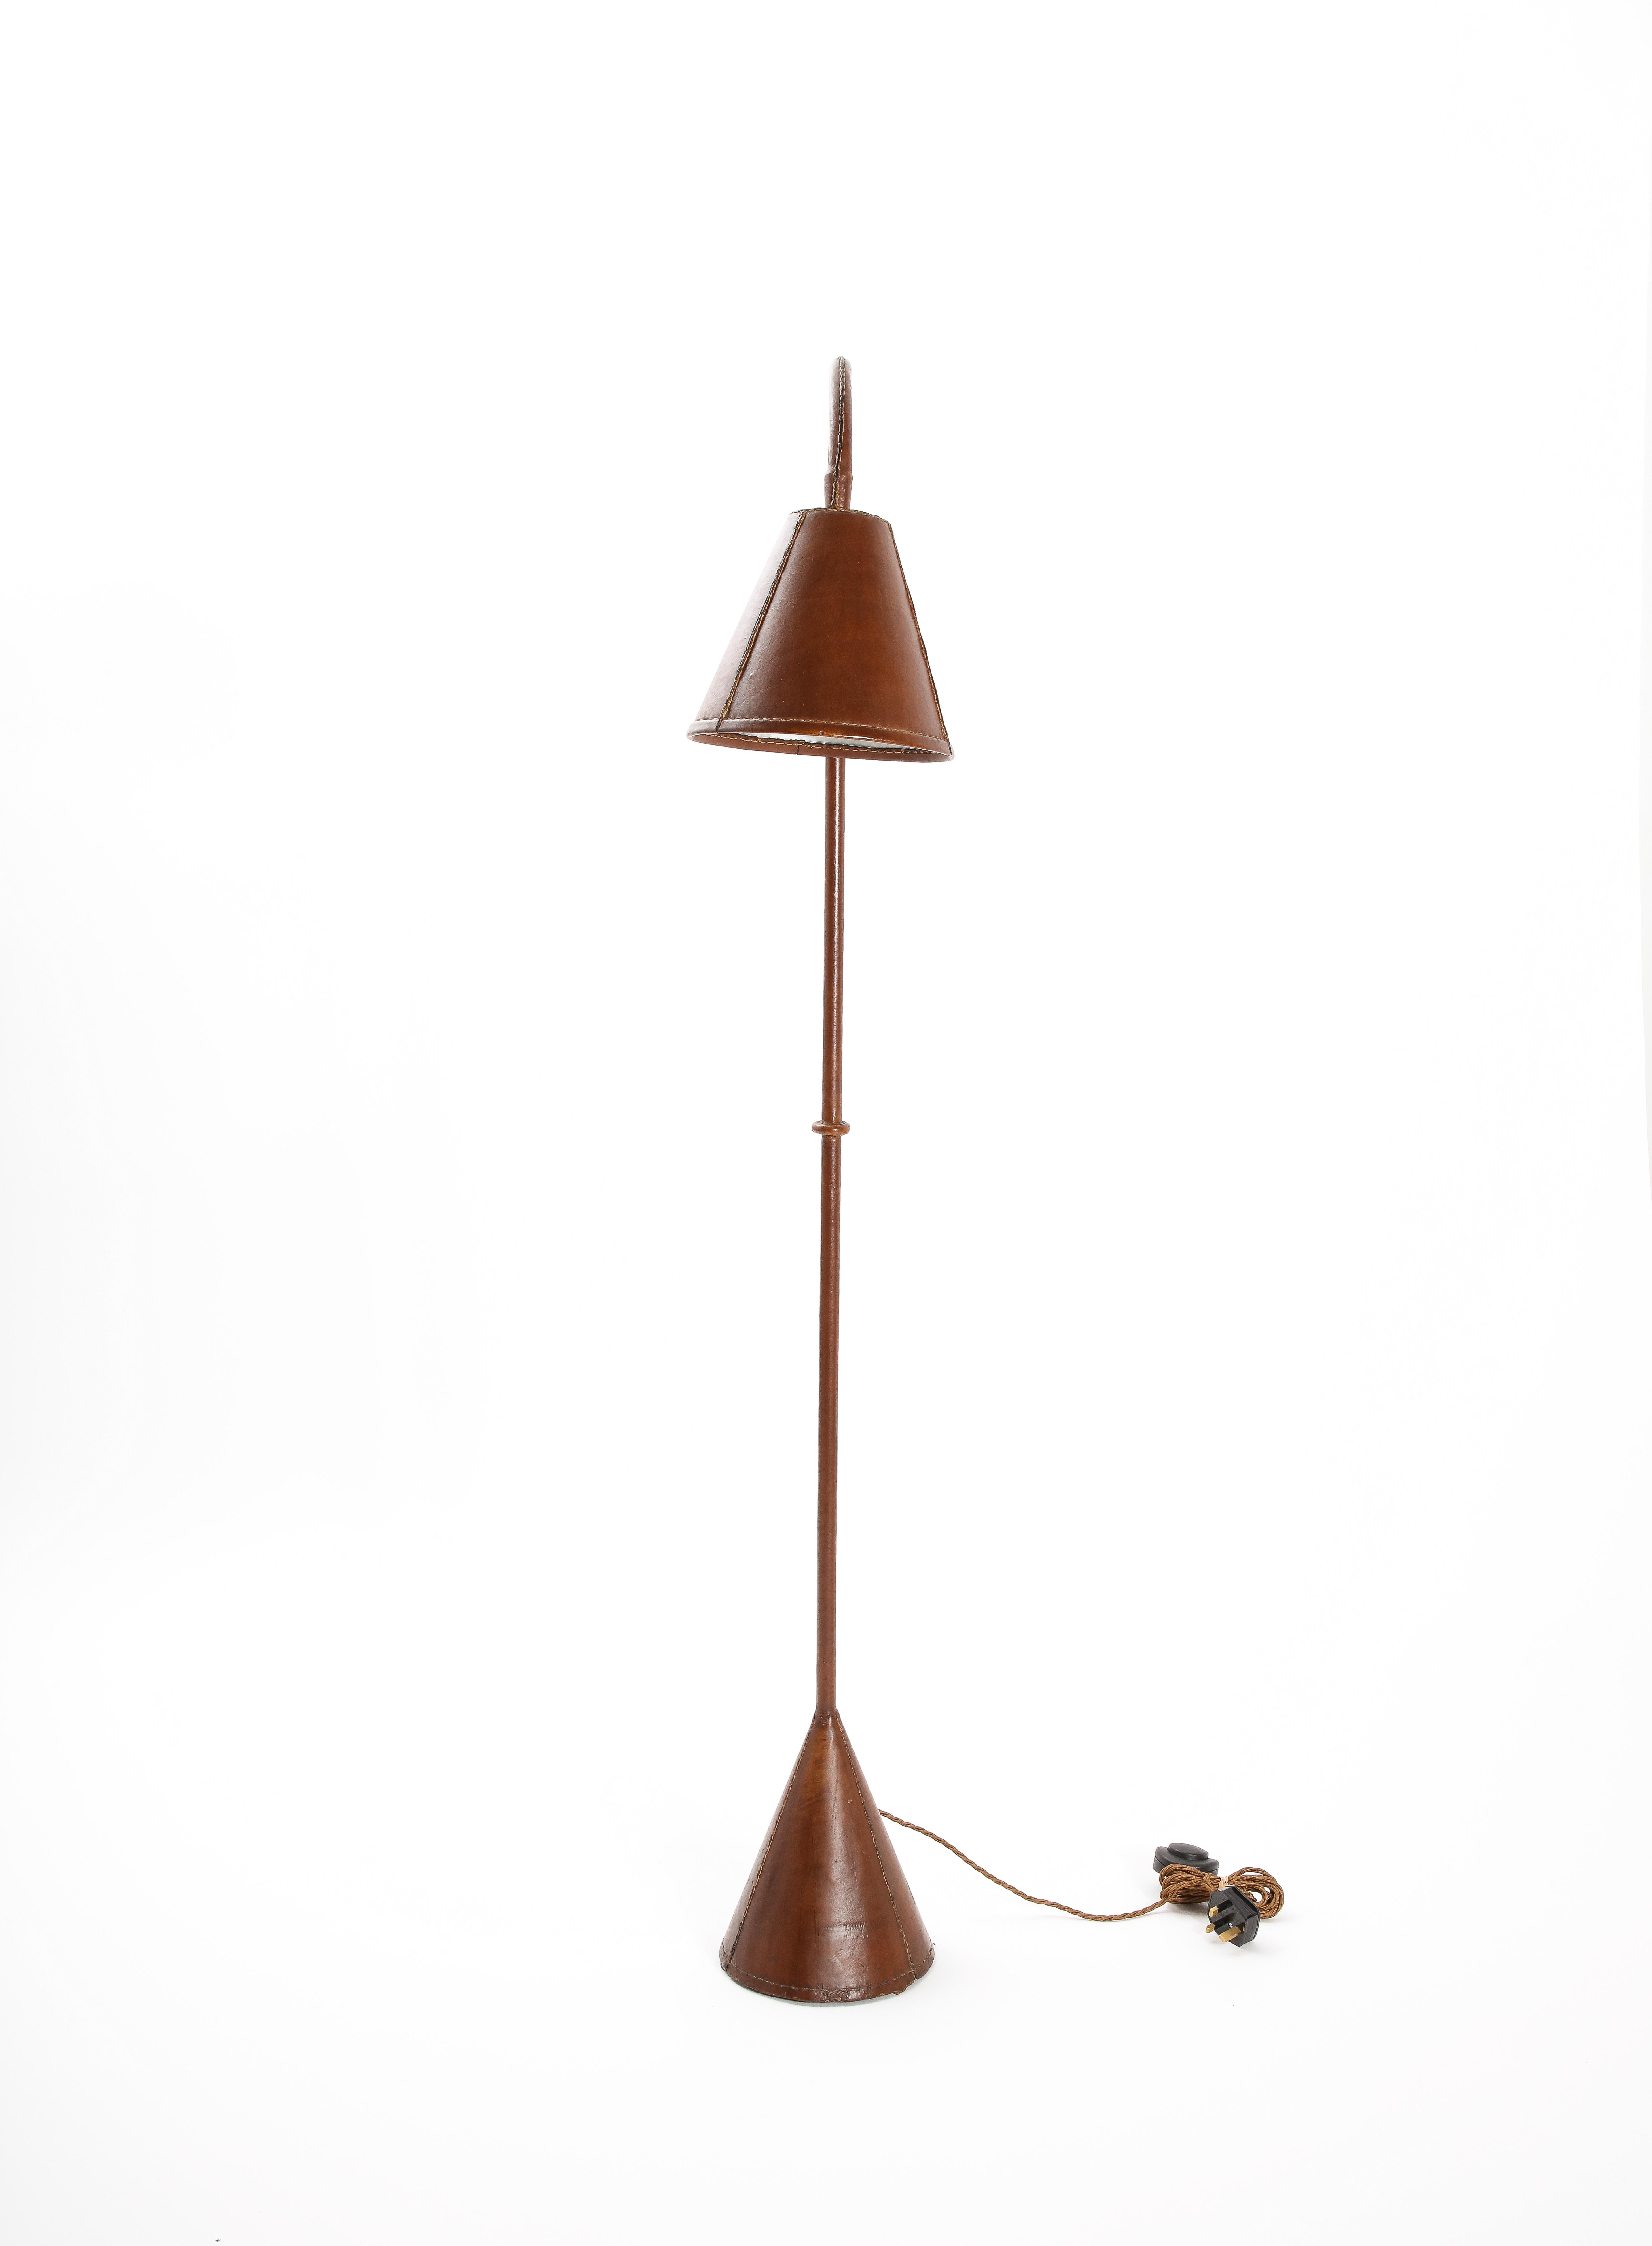 French Jacques Adnet Dual Cone Floor Lamp, France, 1950's